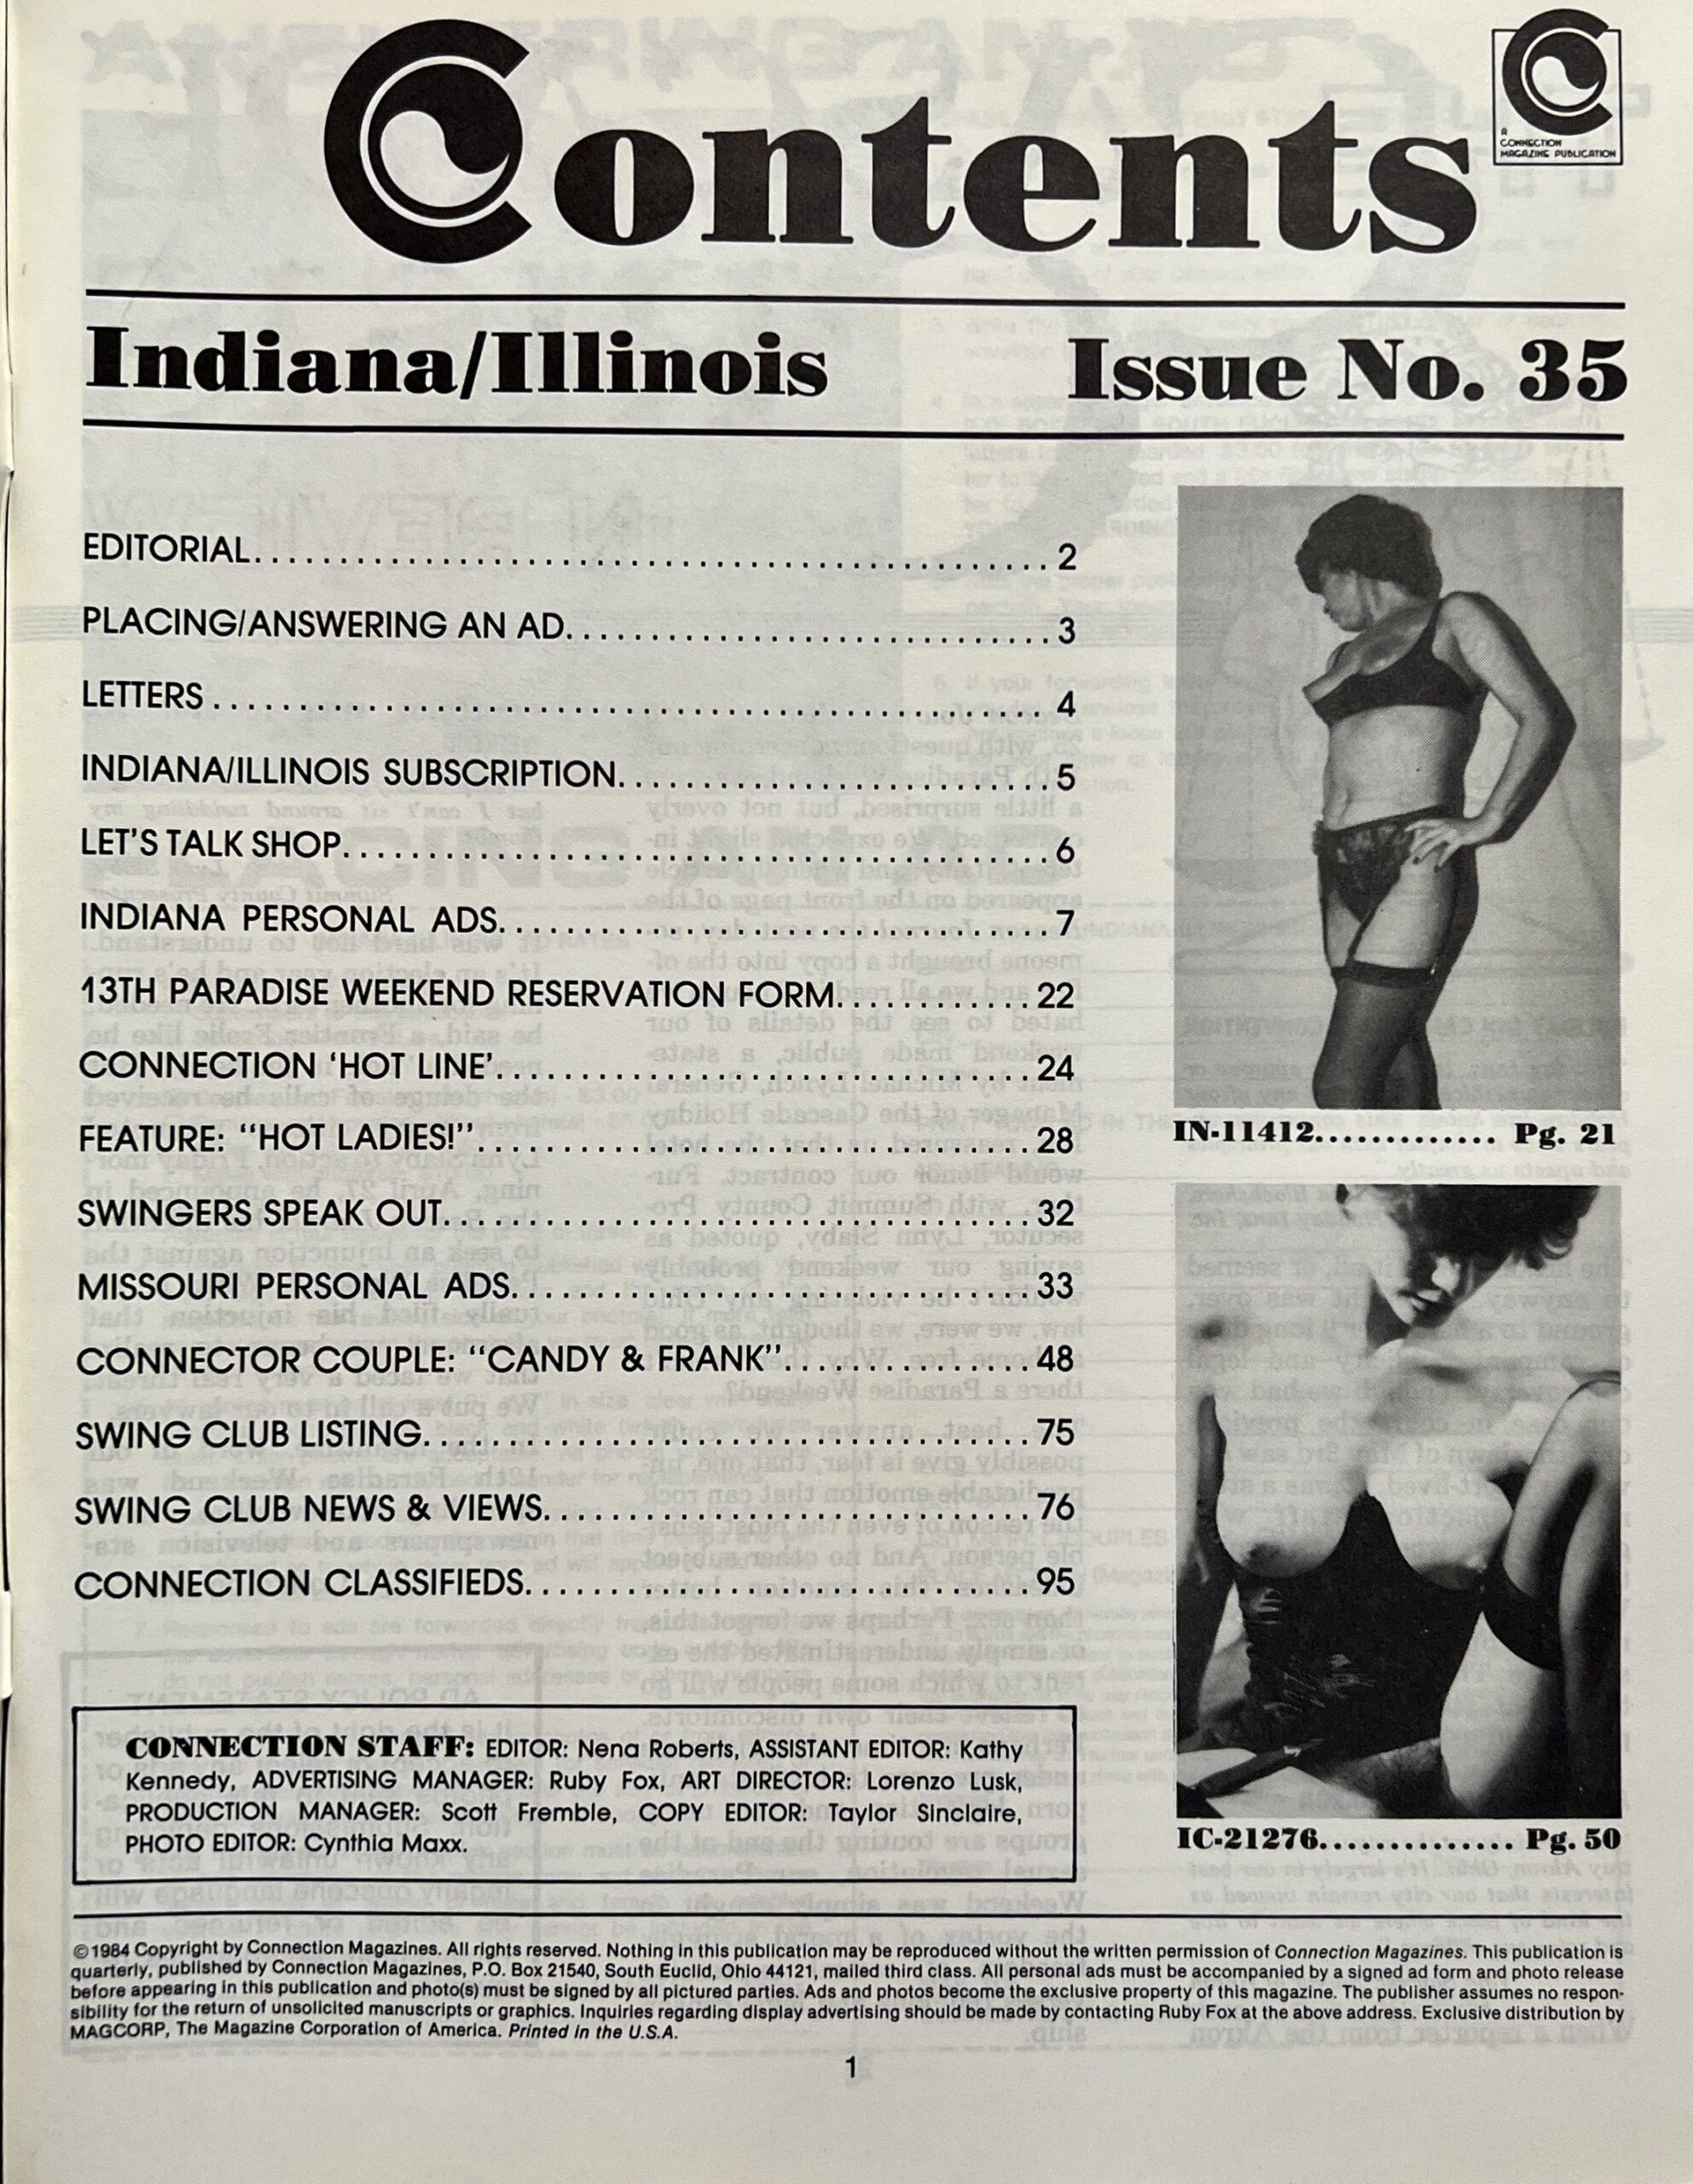 Indiana Illinois Connection #34 1984 Adult Personals-Swingers-Contatcts Magazine picture